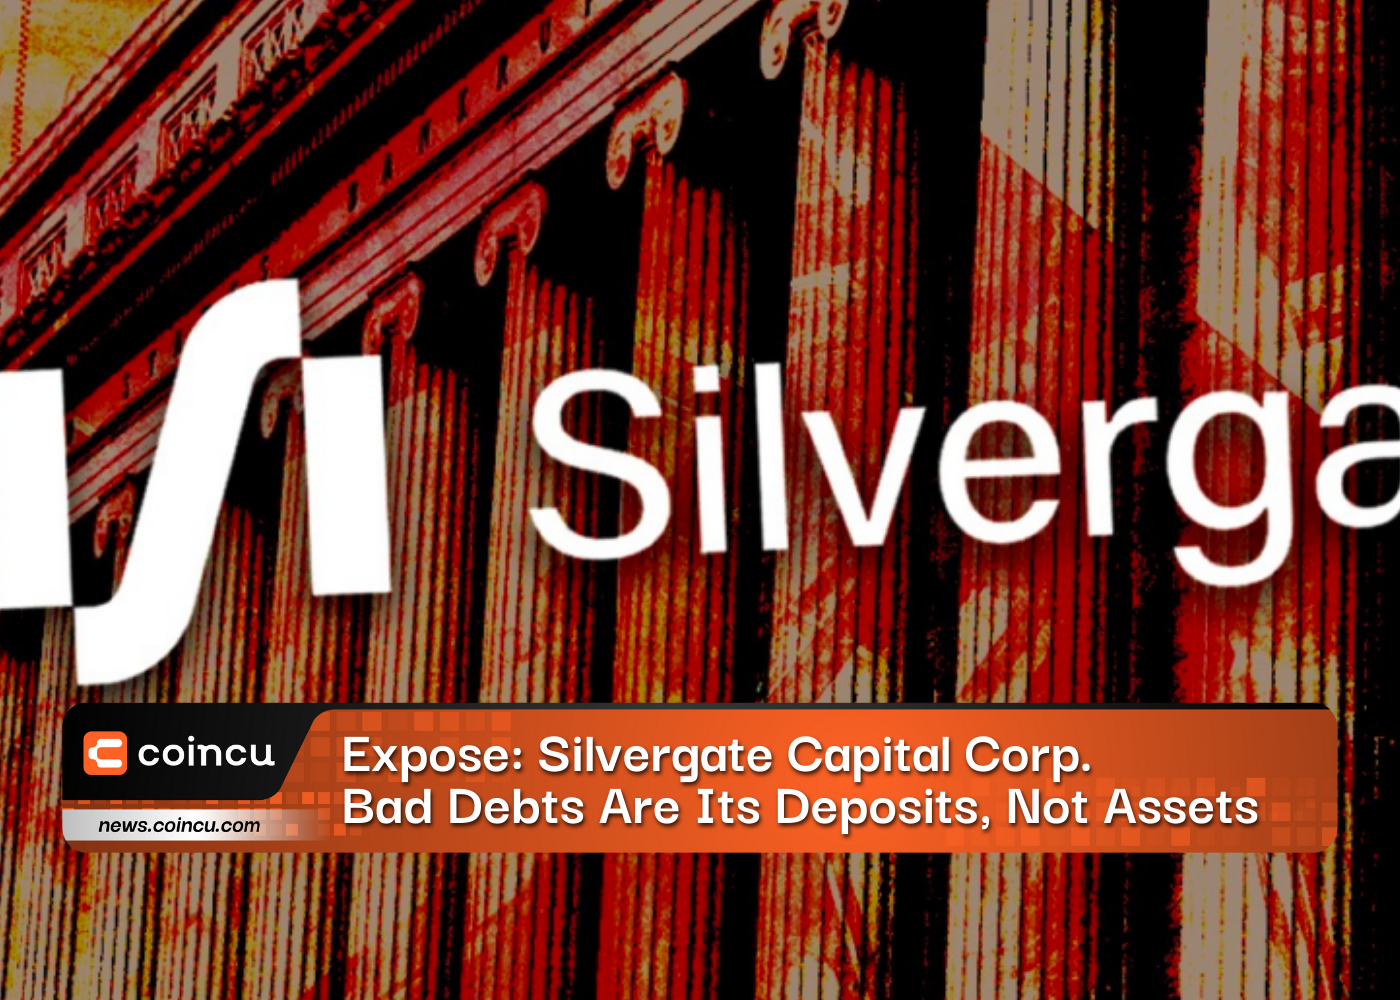 Expose: Silvergate Capital Corp. Bad Debts Are Its Deposits, Not Assets